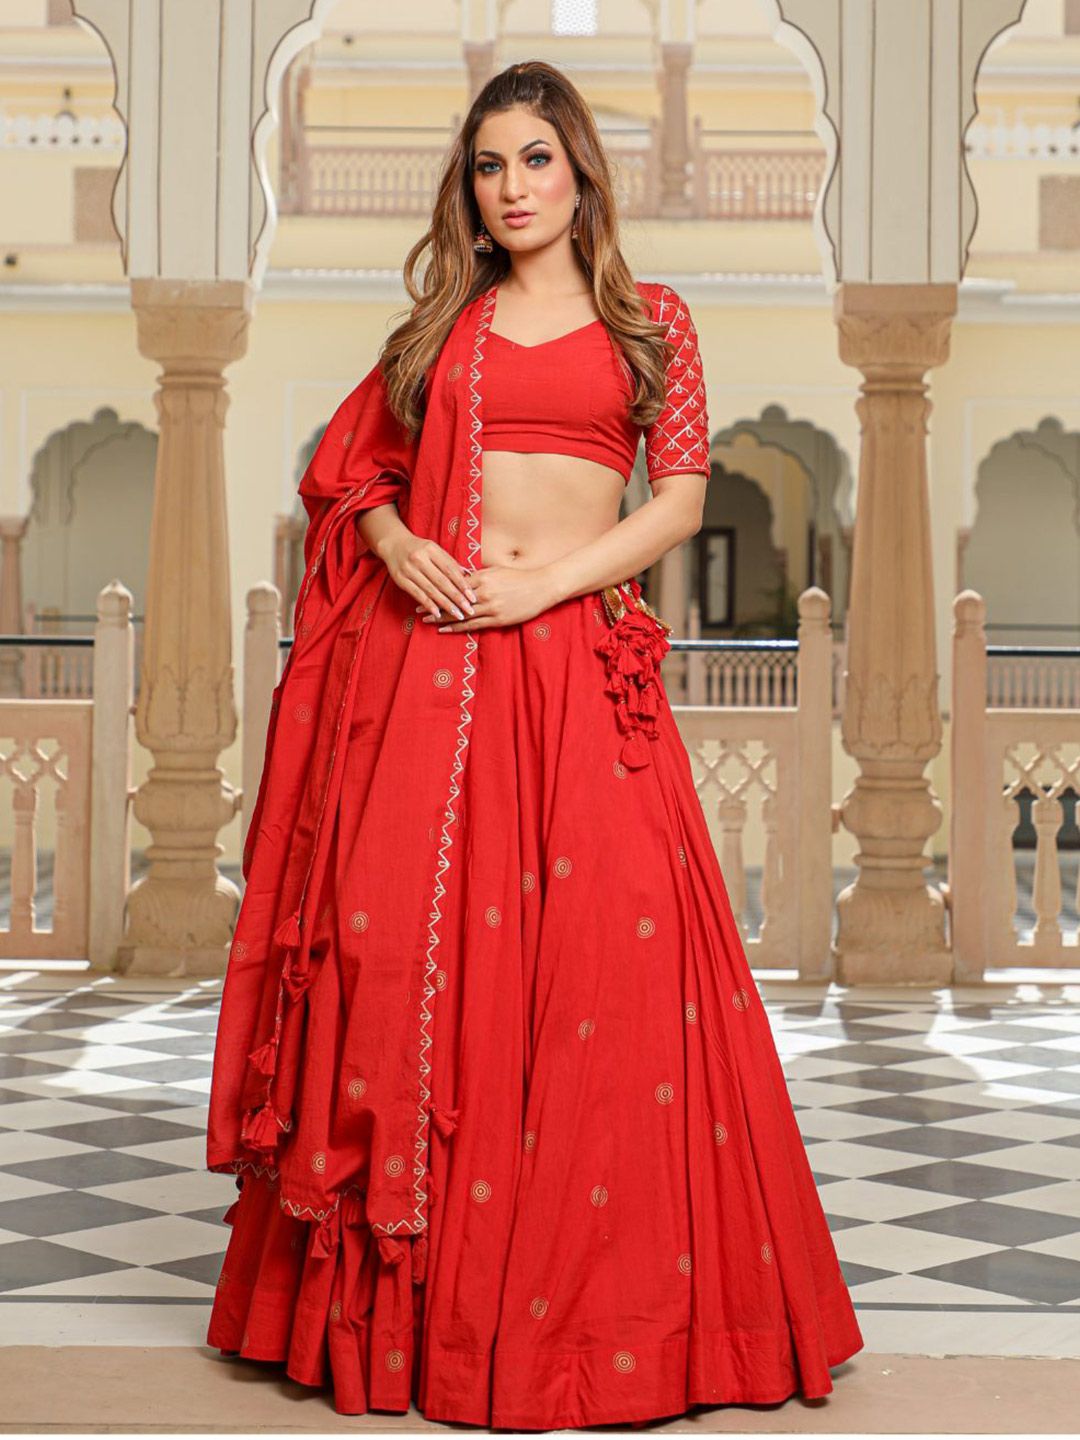 Baisacrafts Red & Gold-Toned Embroidered Block Print Lehenga Choli With Dupatta Price in India